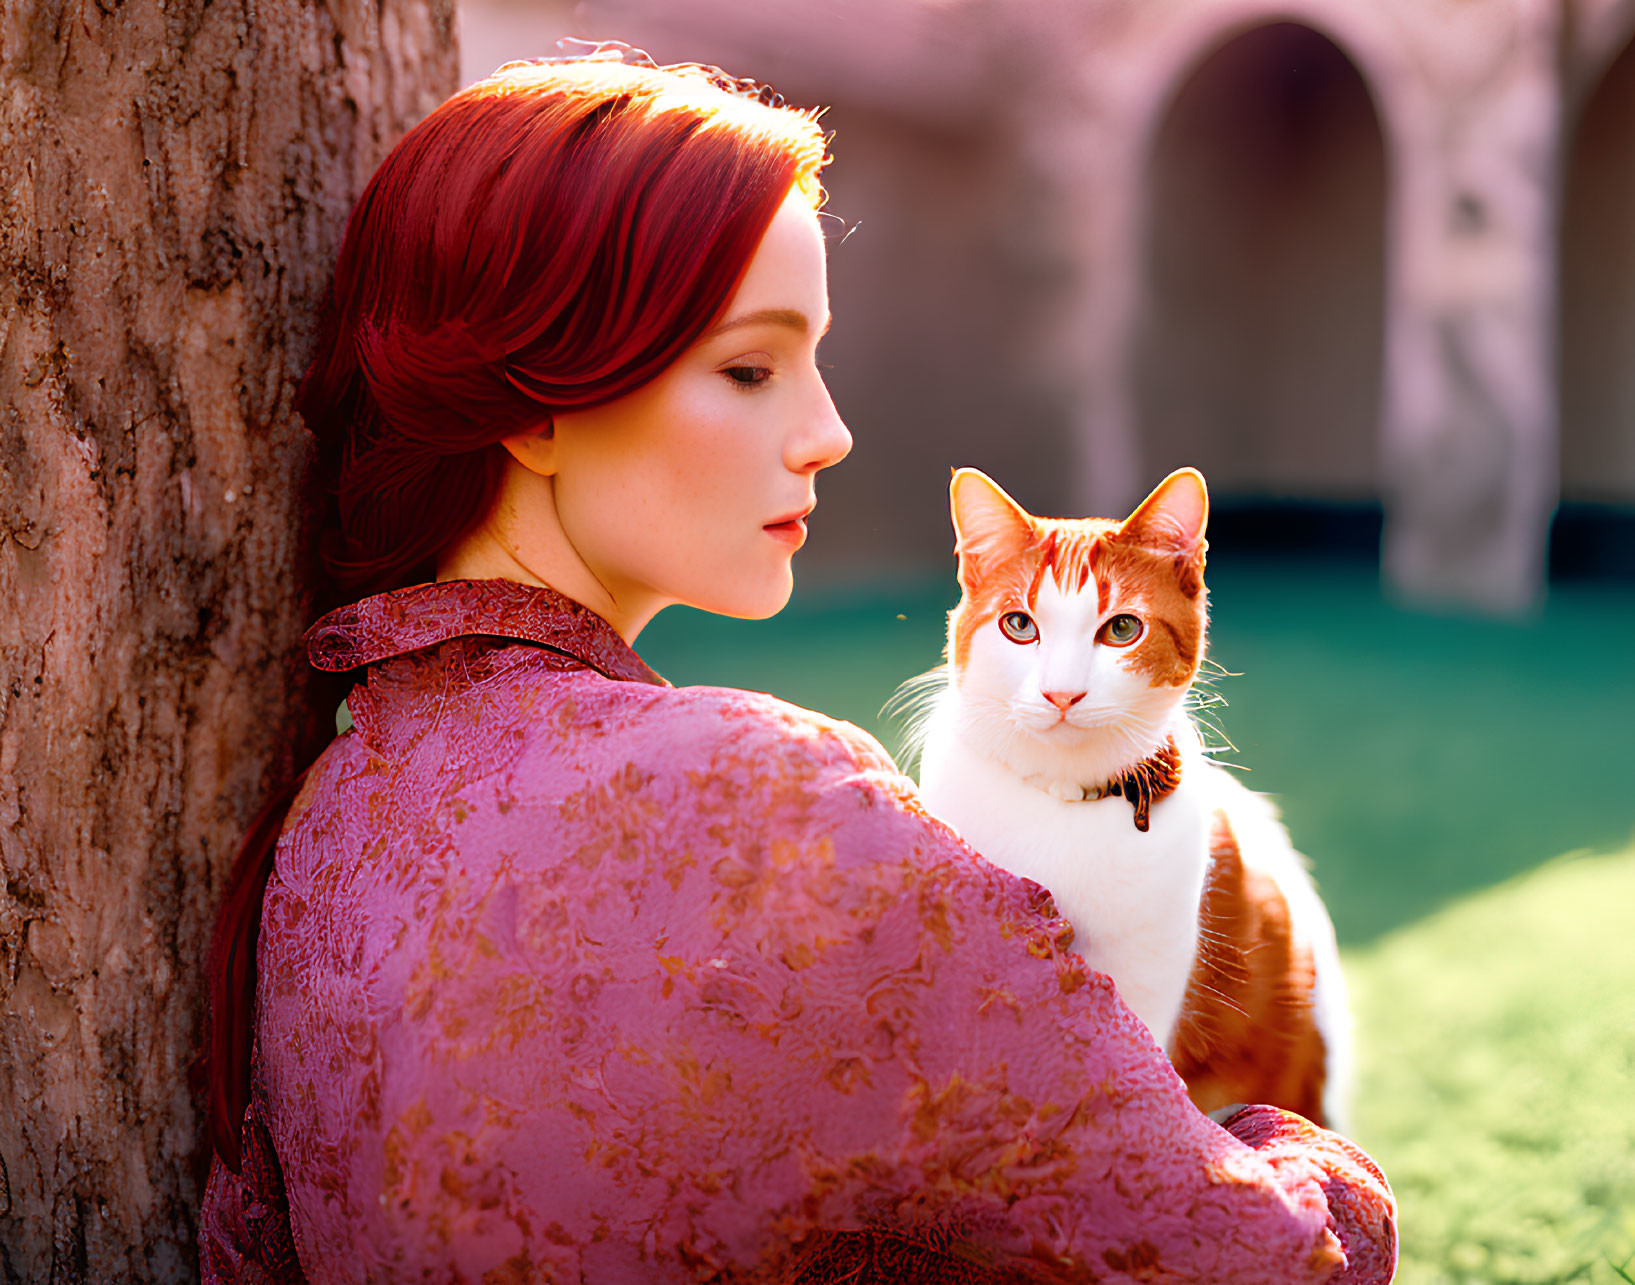 Red-haired woman holding orange and white cat in sunny embrace